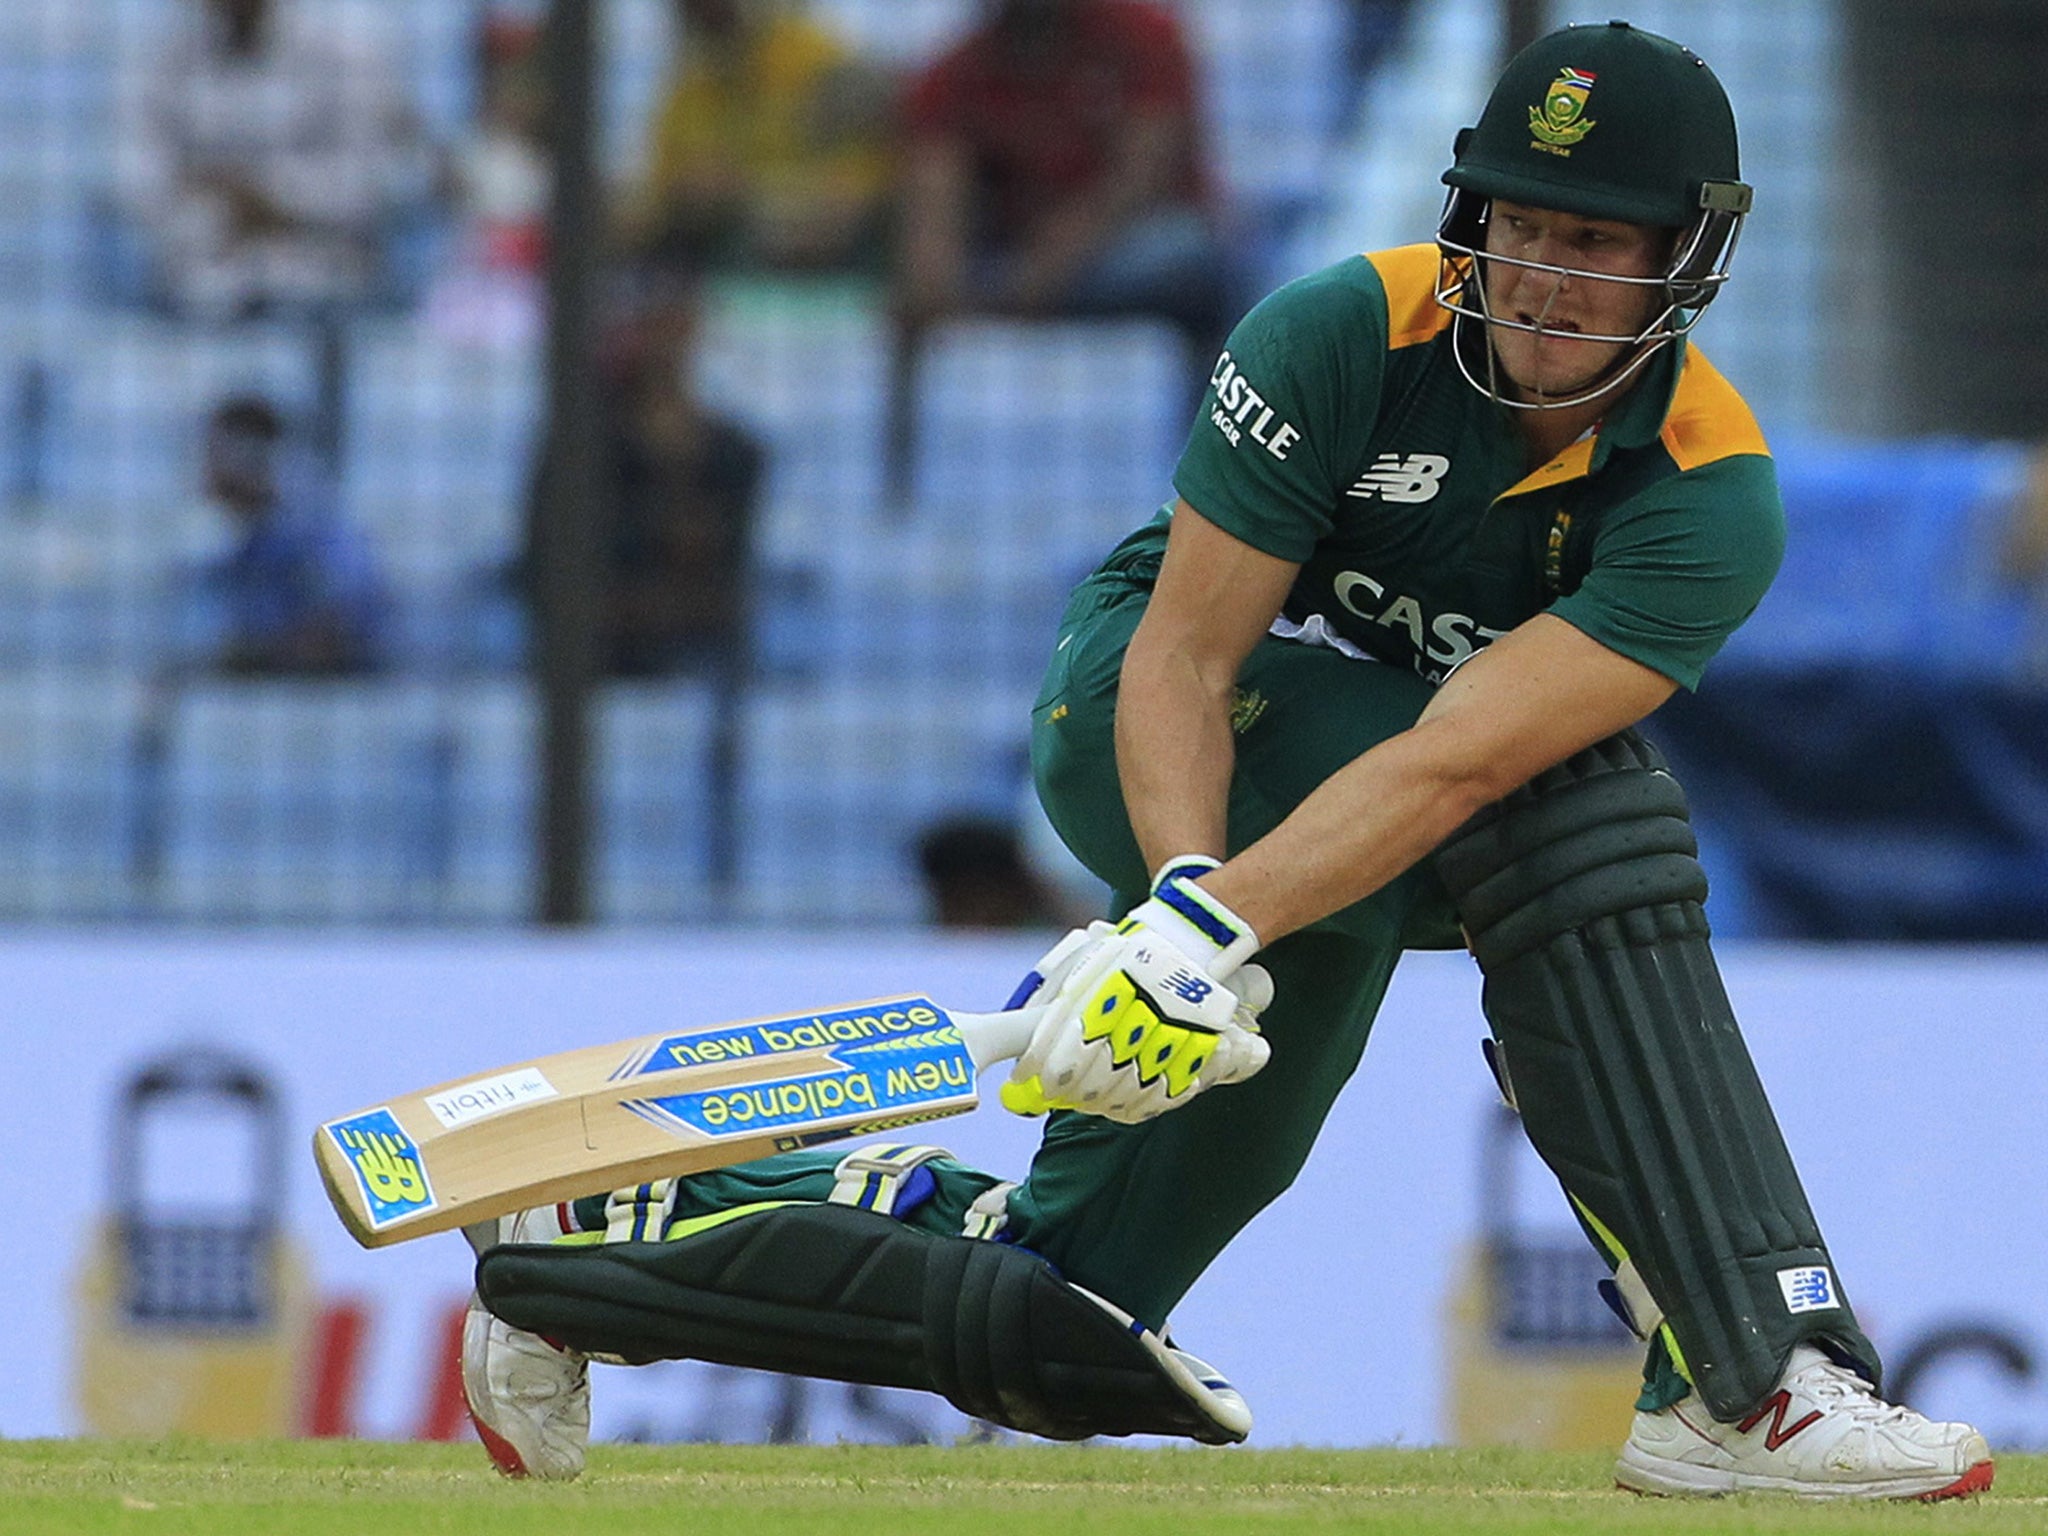 The South Africa team goes into the tests against England on uncertain ground